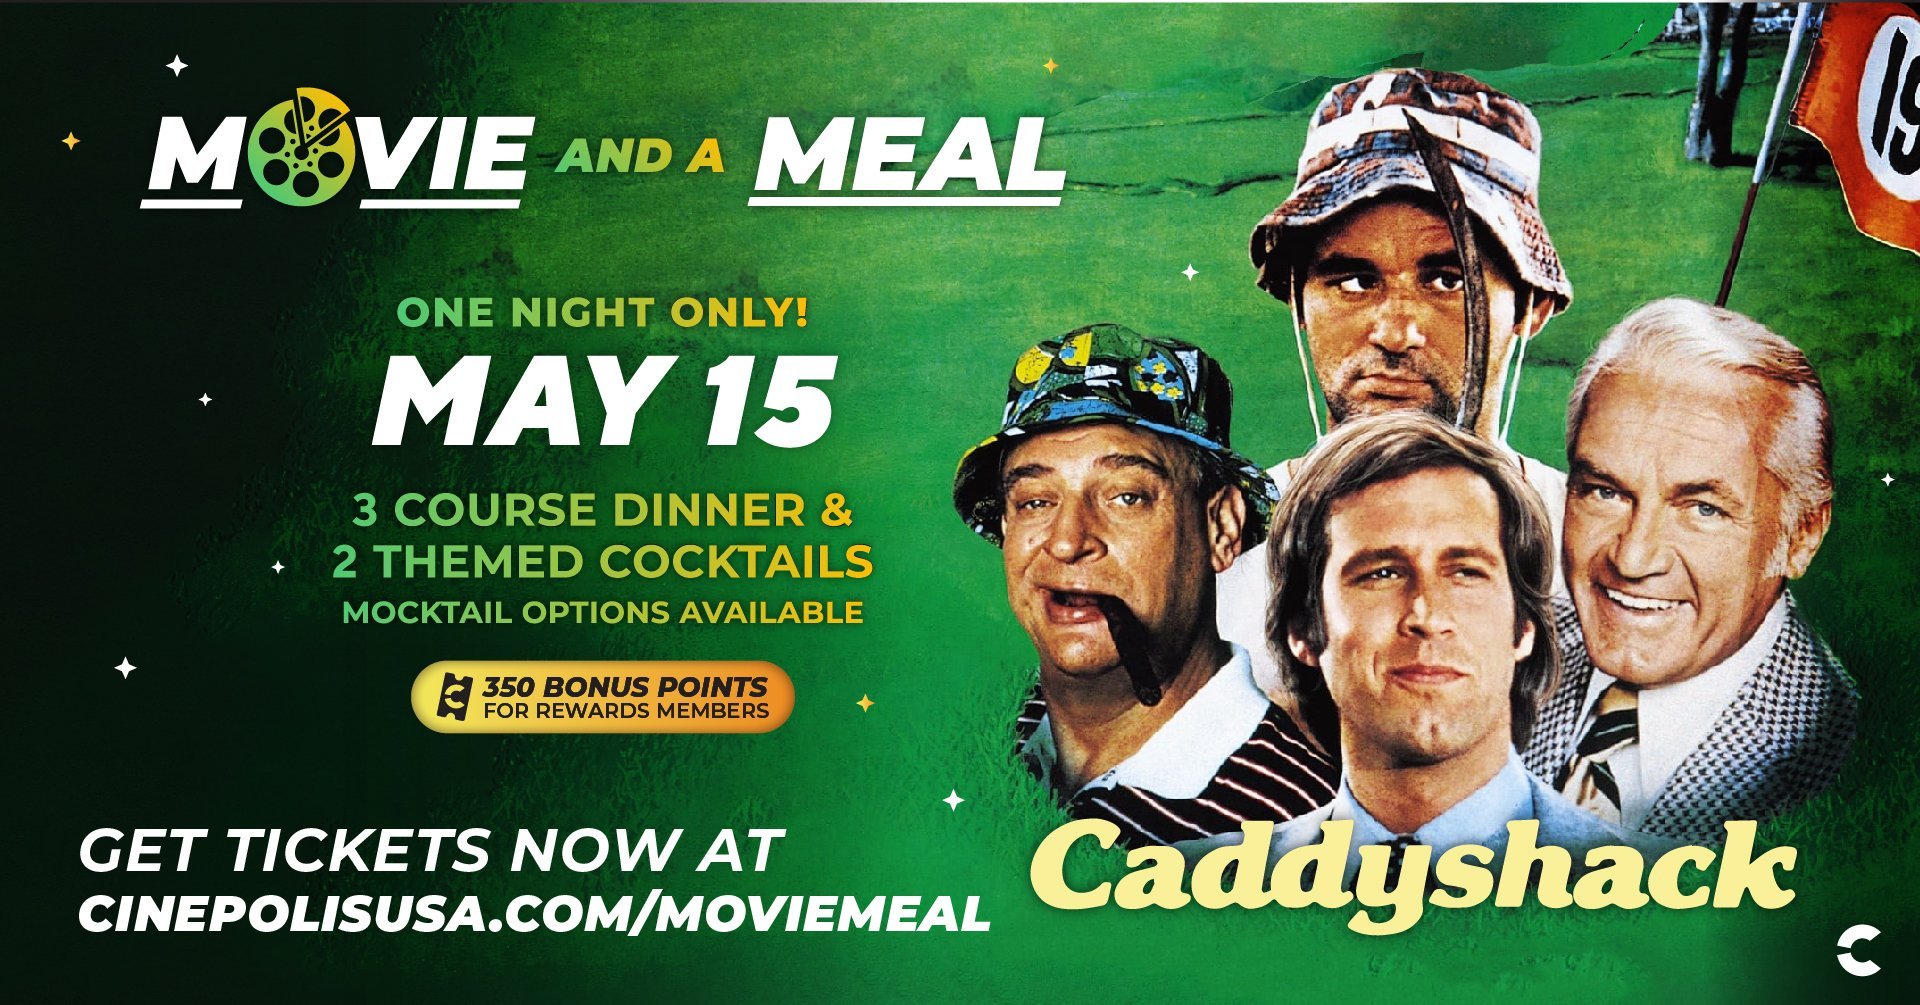 Join us at Cinepolis and Moviehouse for a Caddyshack golf themed dinner and a movie